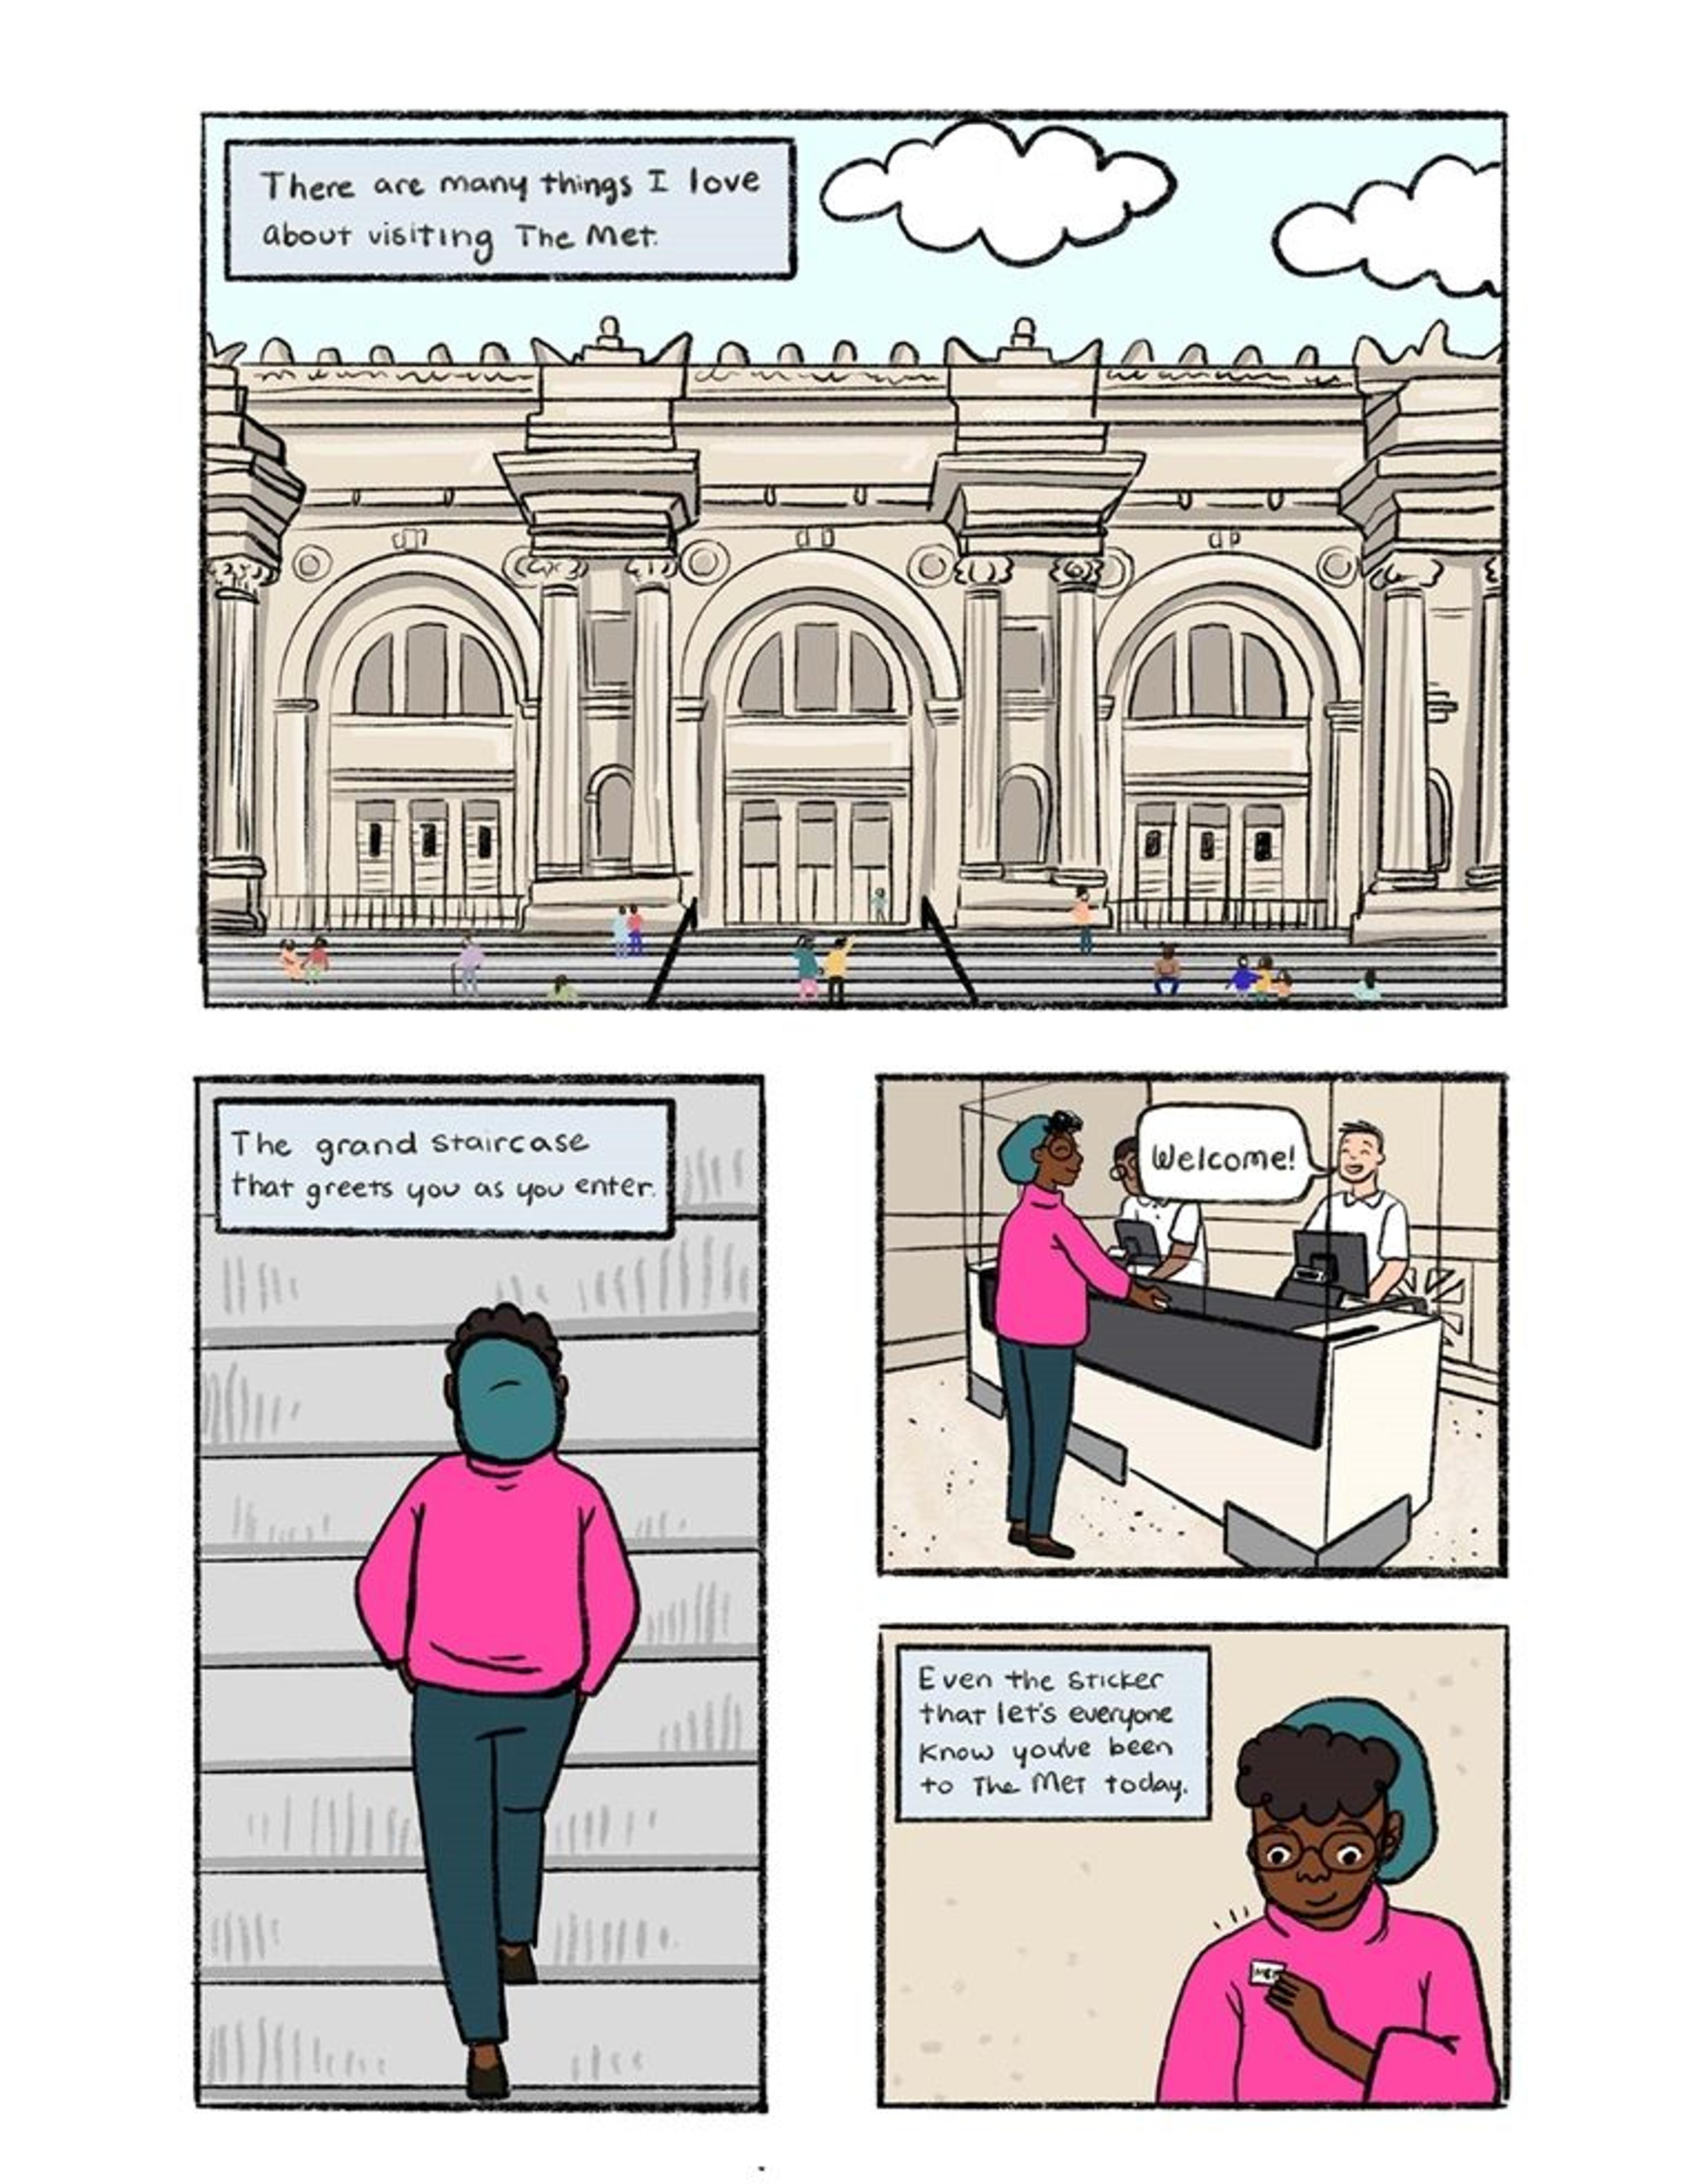 The upper half of this comic book page is a drawing of the front steps of The Met Fifth Avenue. A text box reads: There are many things I love about The Met." In the lower left, a young girl in a pink sweater and green beretwalks up the steps. A text box reads: "The Grand Staircase that greets you as you enter." Next, the girl purchases a ticket at the ticket desk and is greeted by a visitor services host who says Hello! Finally she places a sticker on her shirt. The text box reads "Even the sticker that lets everyone know that you've been to The Met that day."